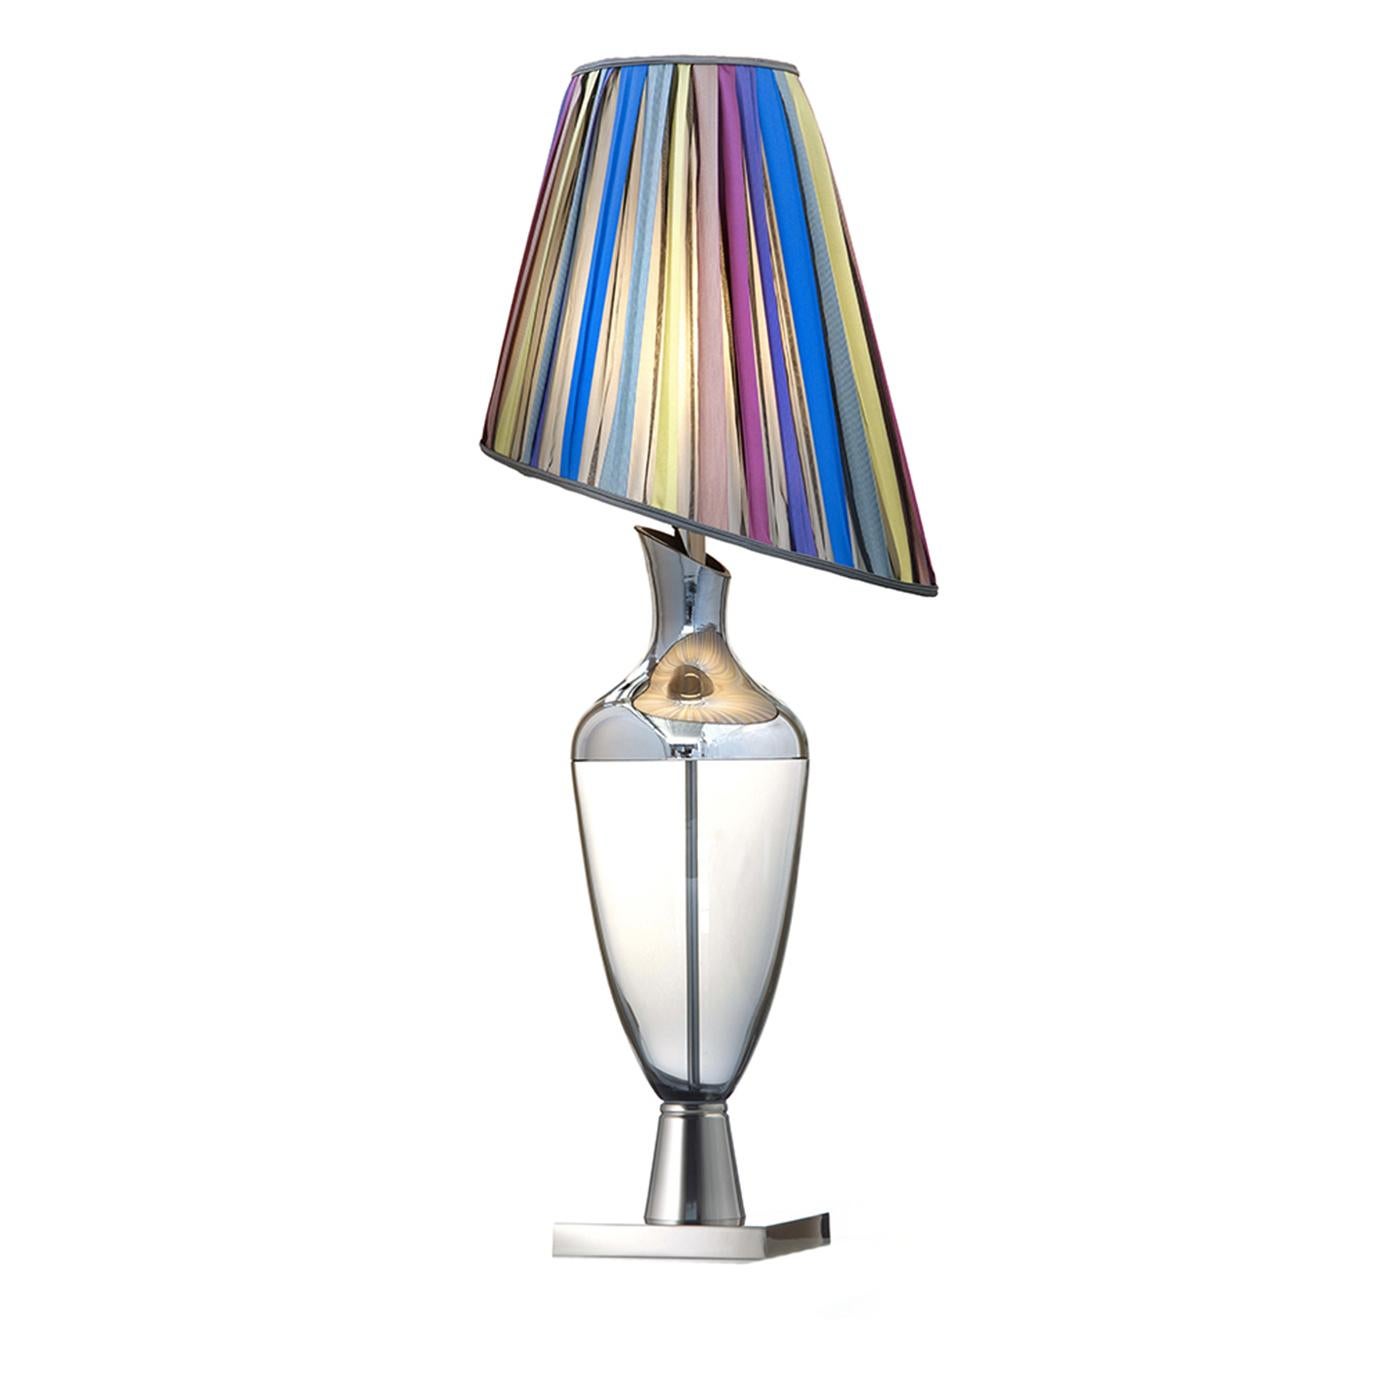 This elegant table lamp will add a colorful accent to any interior, thanks to the mirrored effect of its asymmetrical shade that reflect the light of its E27 x 60 W bulb in a dazzling manner. The inner structure of the piece and its square base are